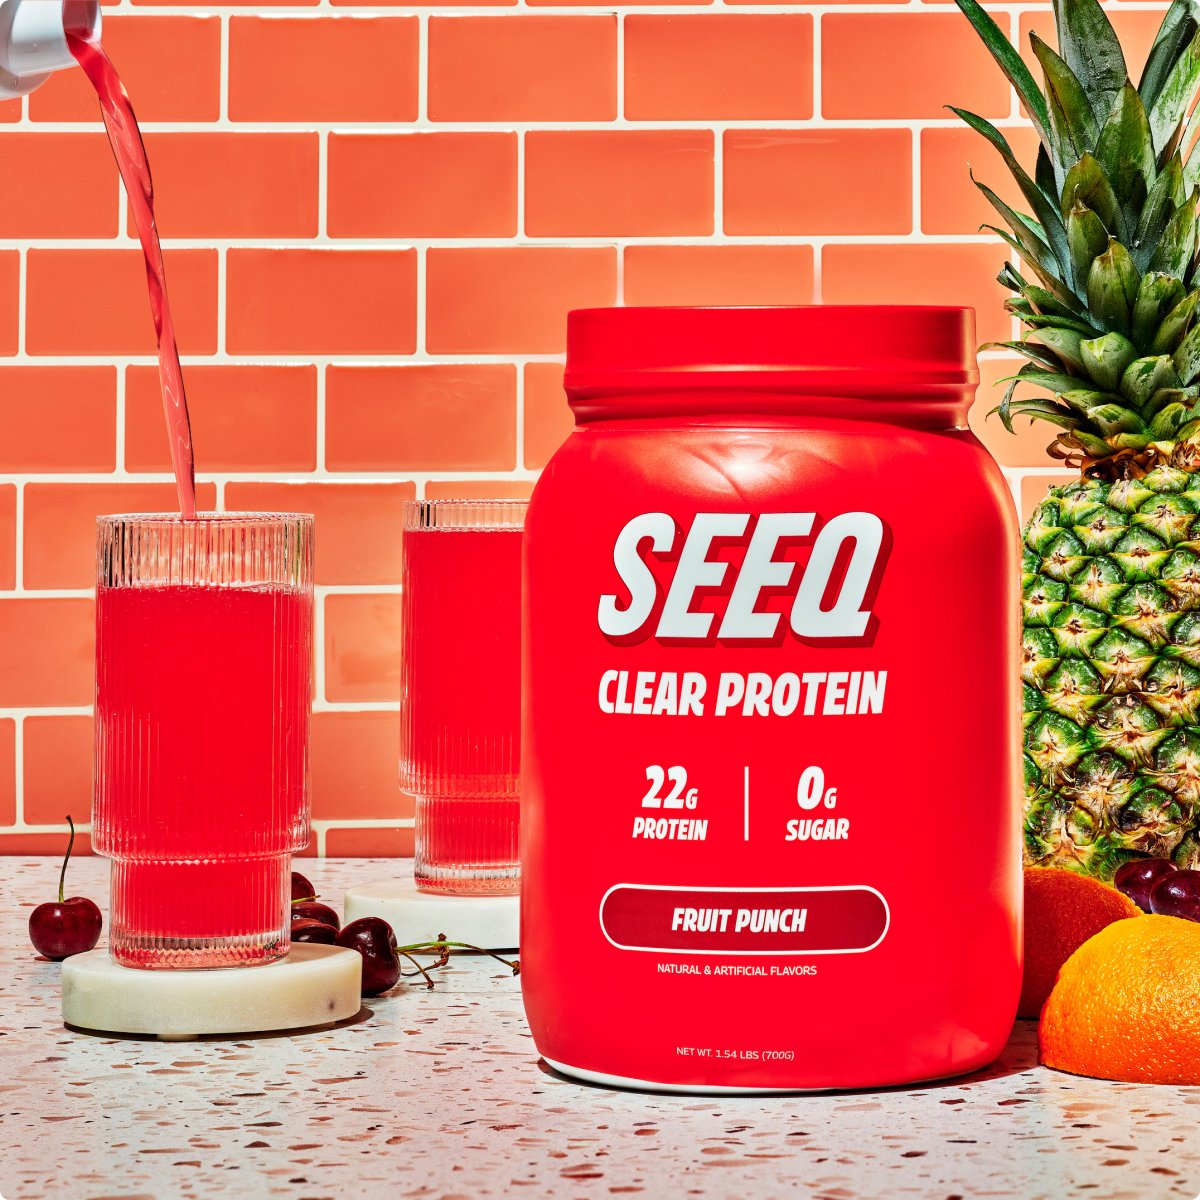 FRUIT PUNCH - SEEQ